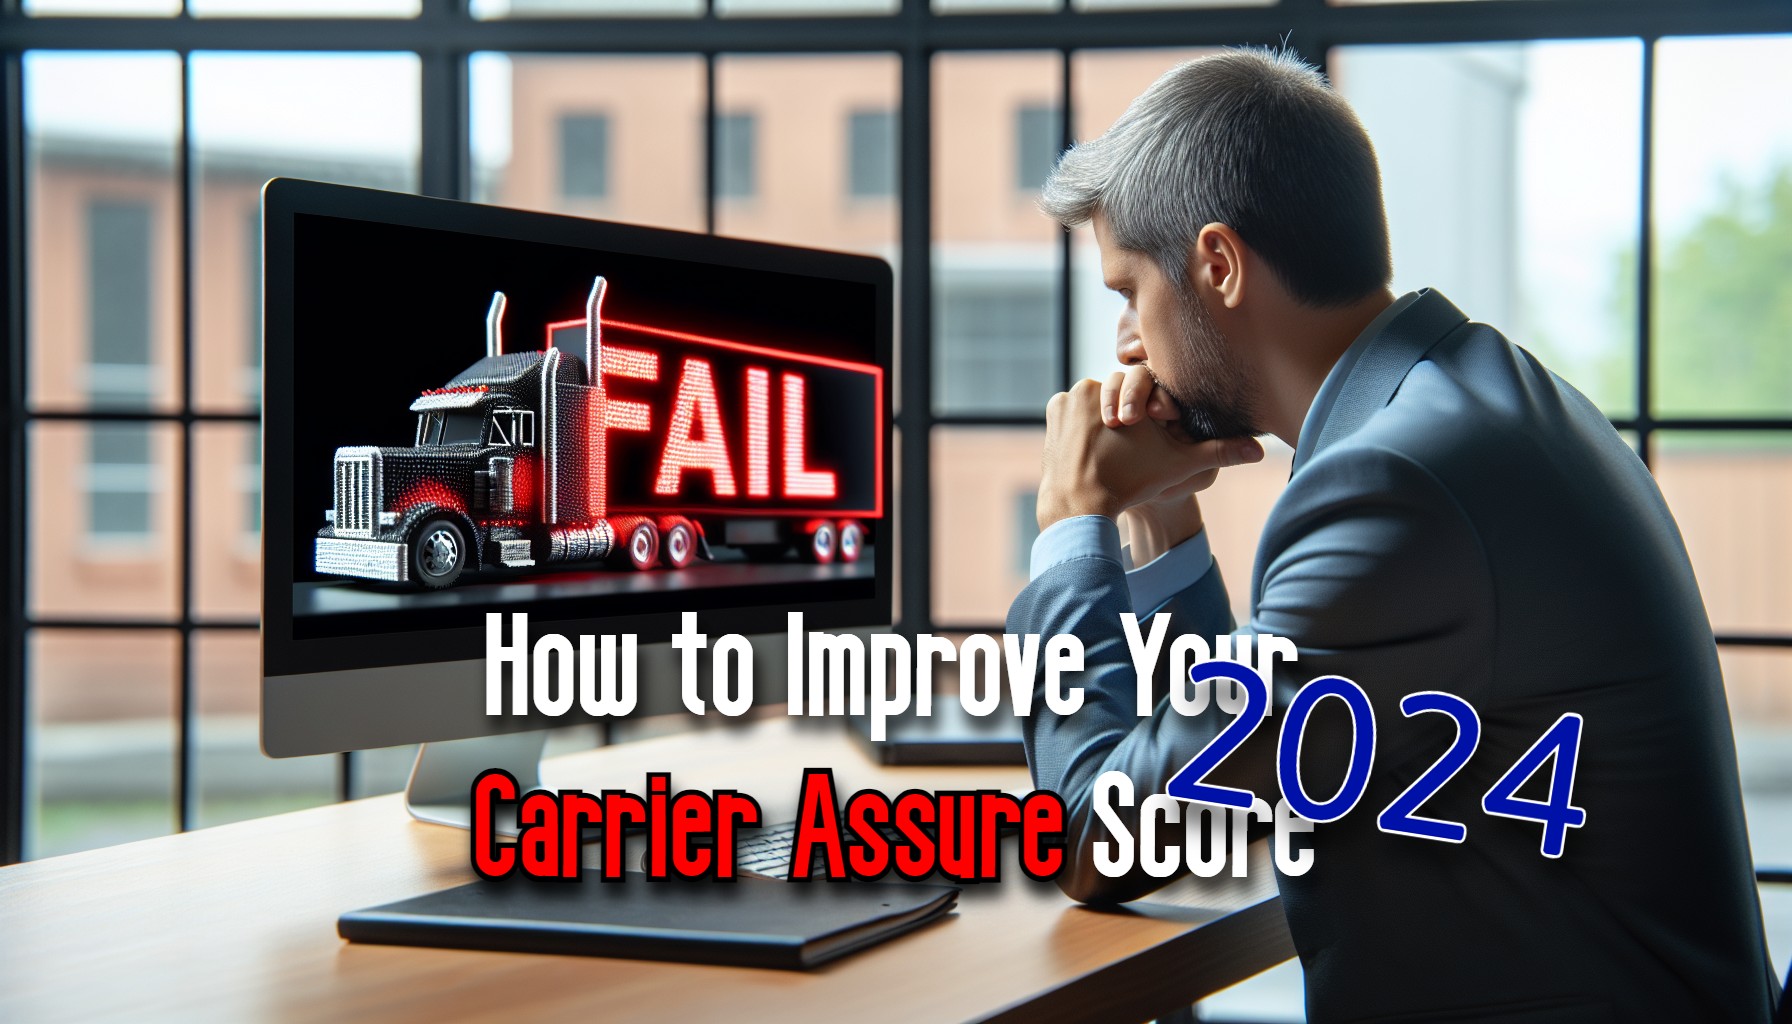 How to Improve Carrier Assure Score in 2024